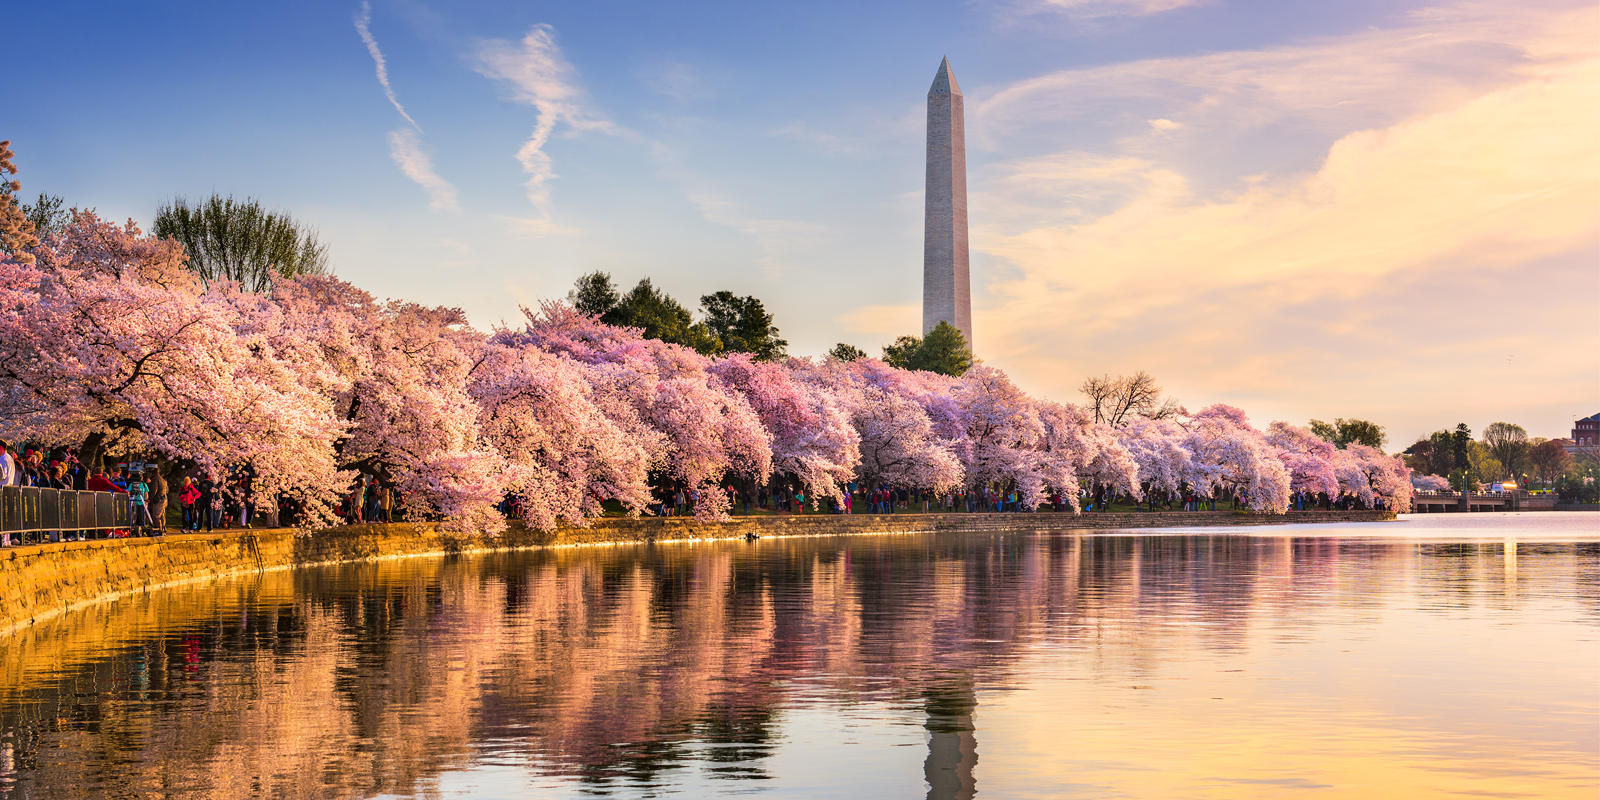 Flights to DC from $69